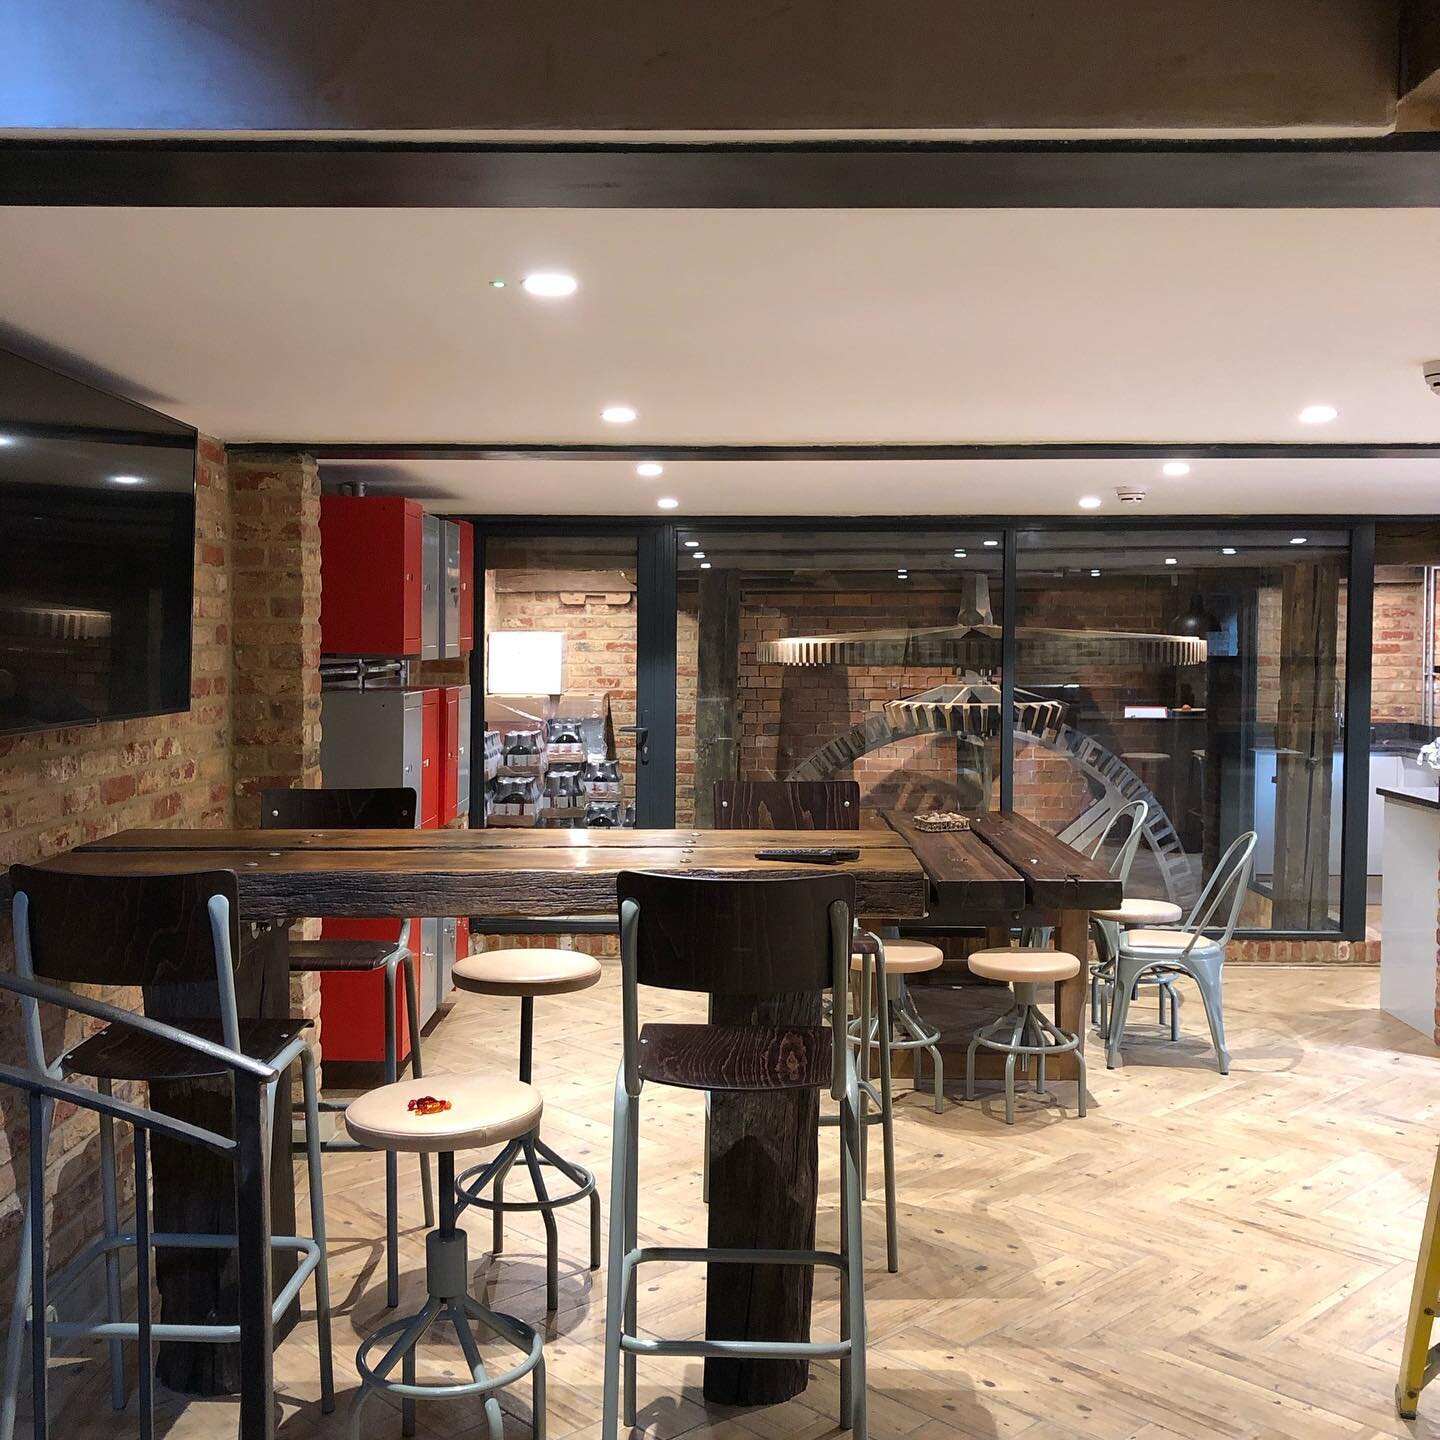 A brief look back at the @seratechnologiesltd lighting installed within our Watermill project.
A full design and supply package superbly delivered by Sera.
#mane #maneelectrical #engineer #lighting #LED #electrical #watermill